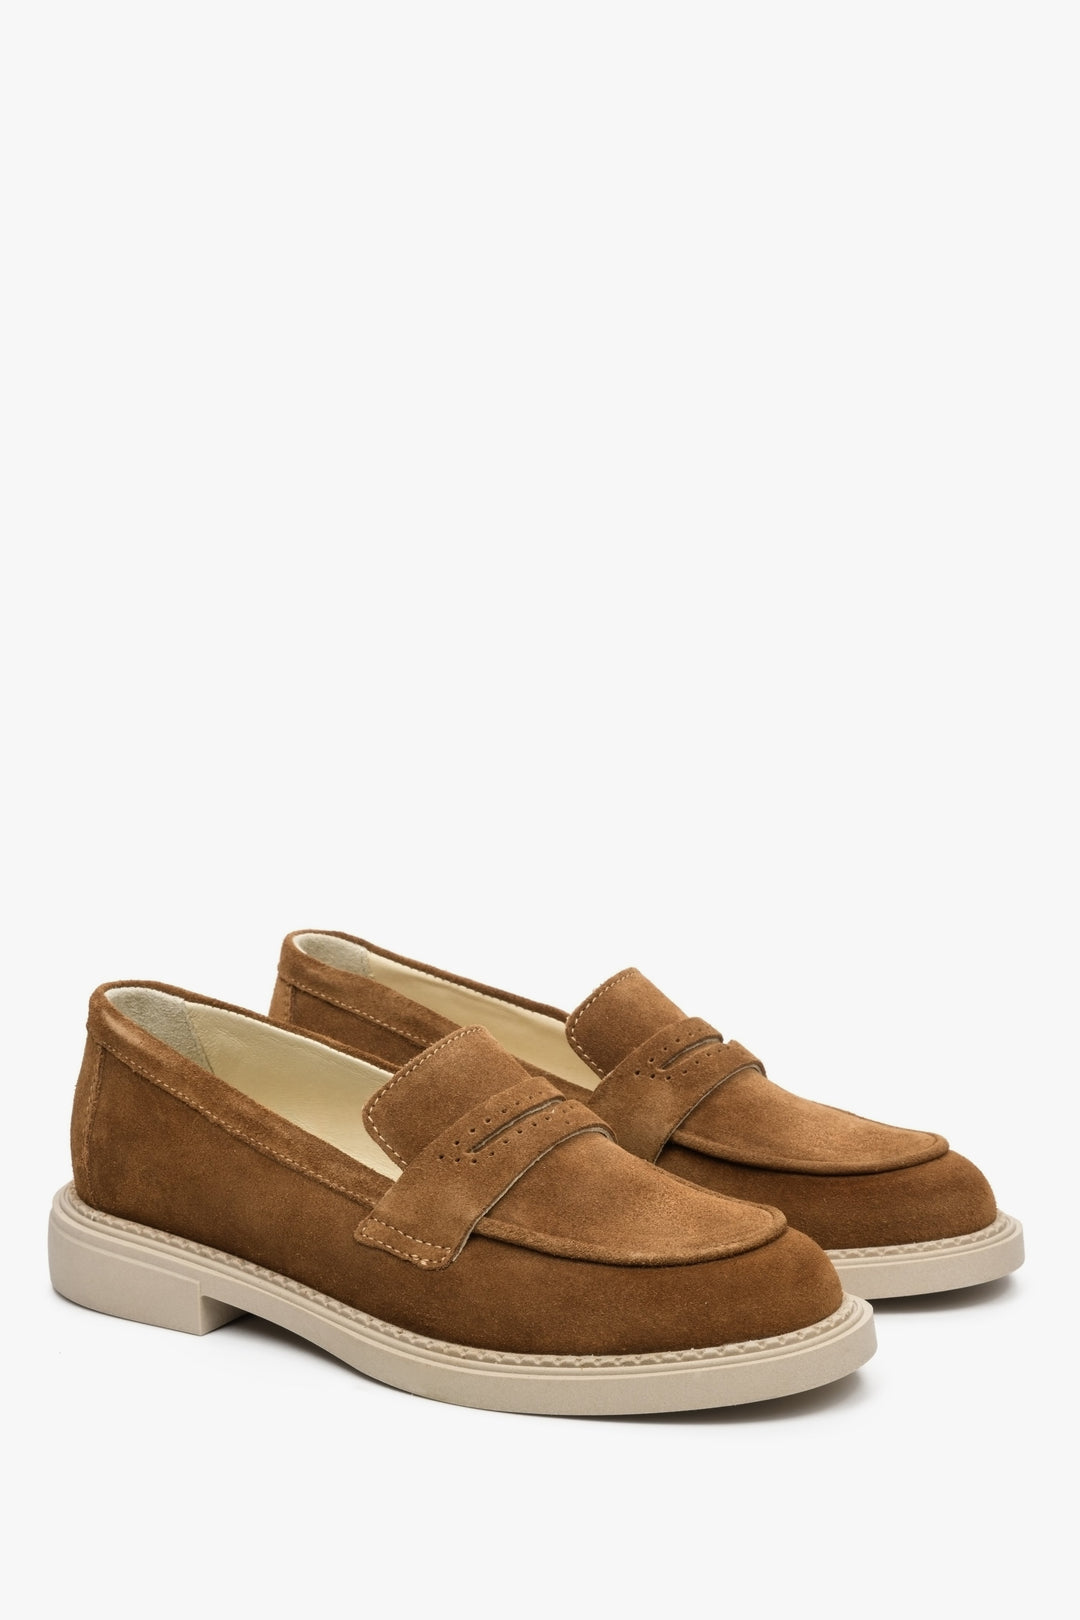 Women's brown suede loafers for spring Estro.